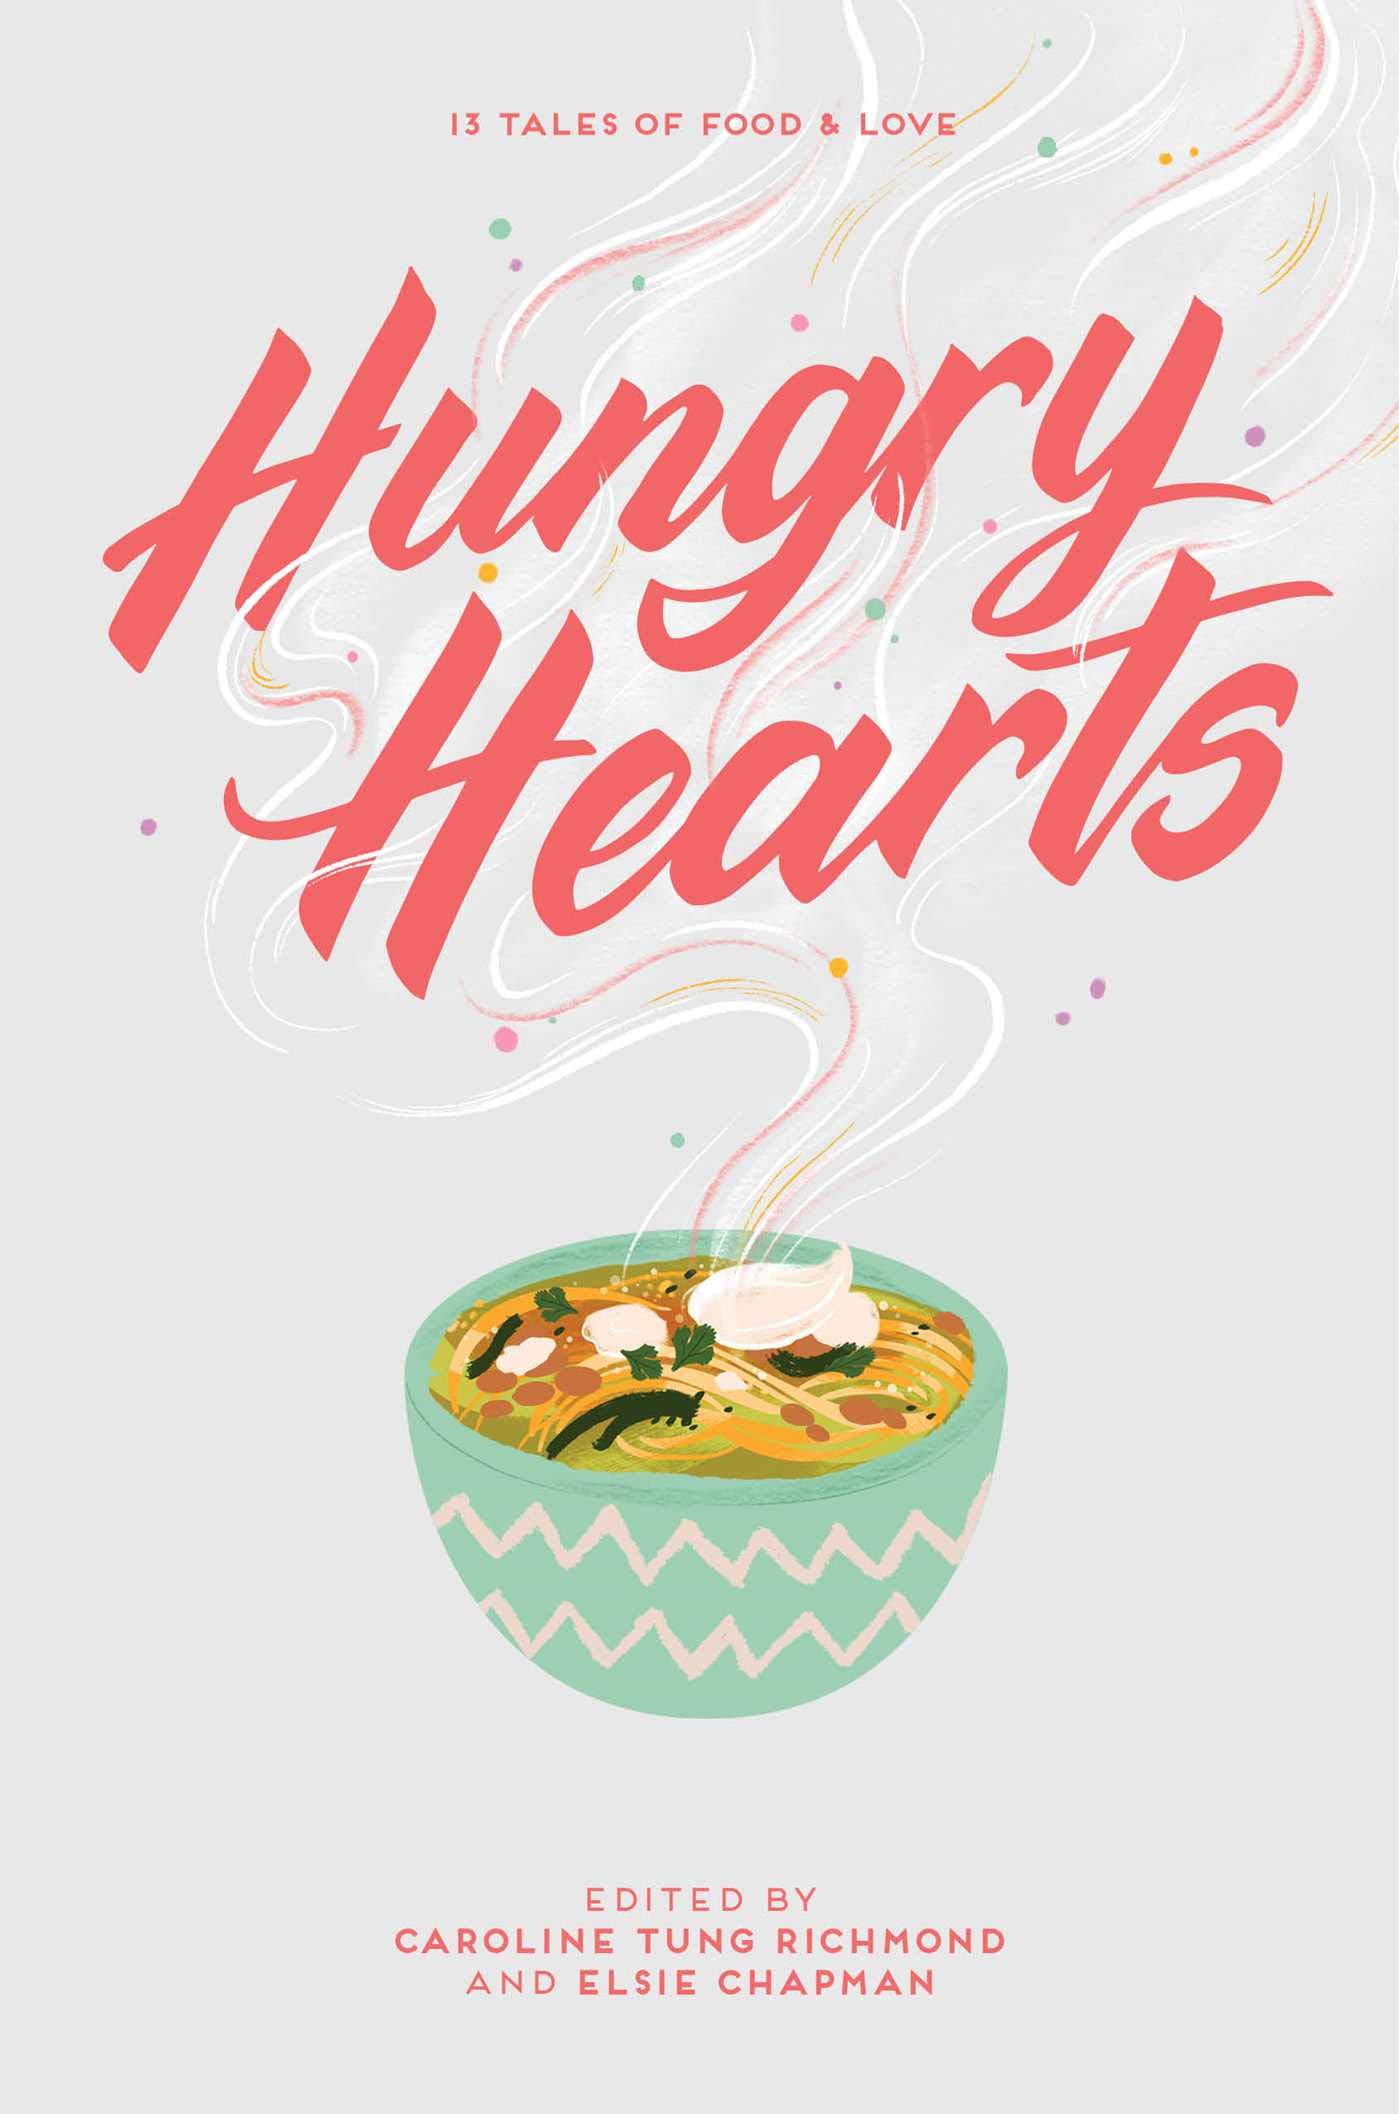 Image for "Hungry Hearts"